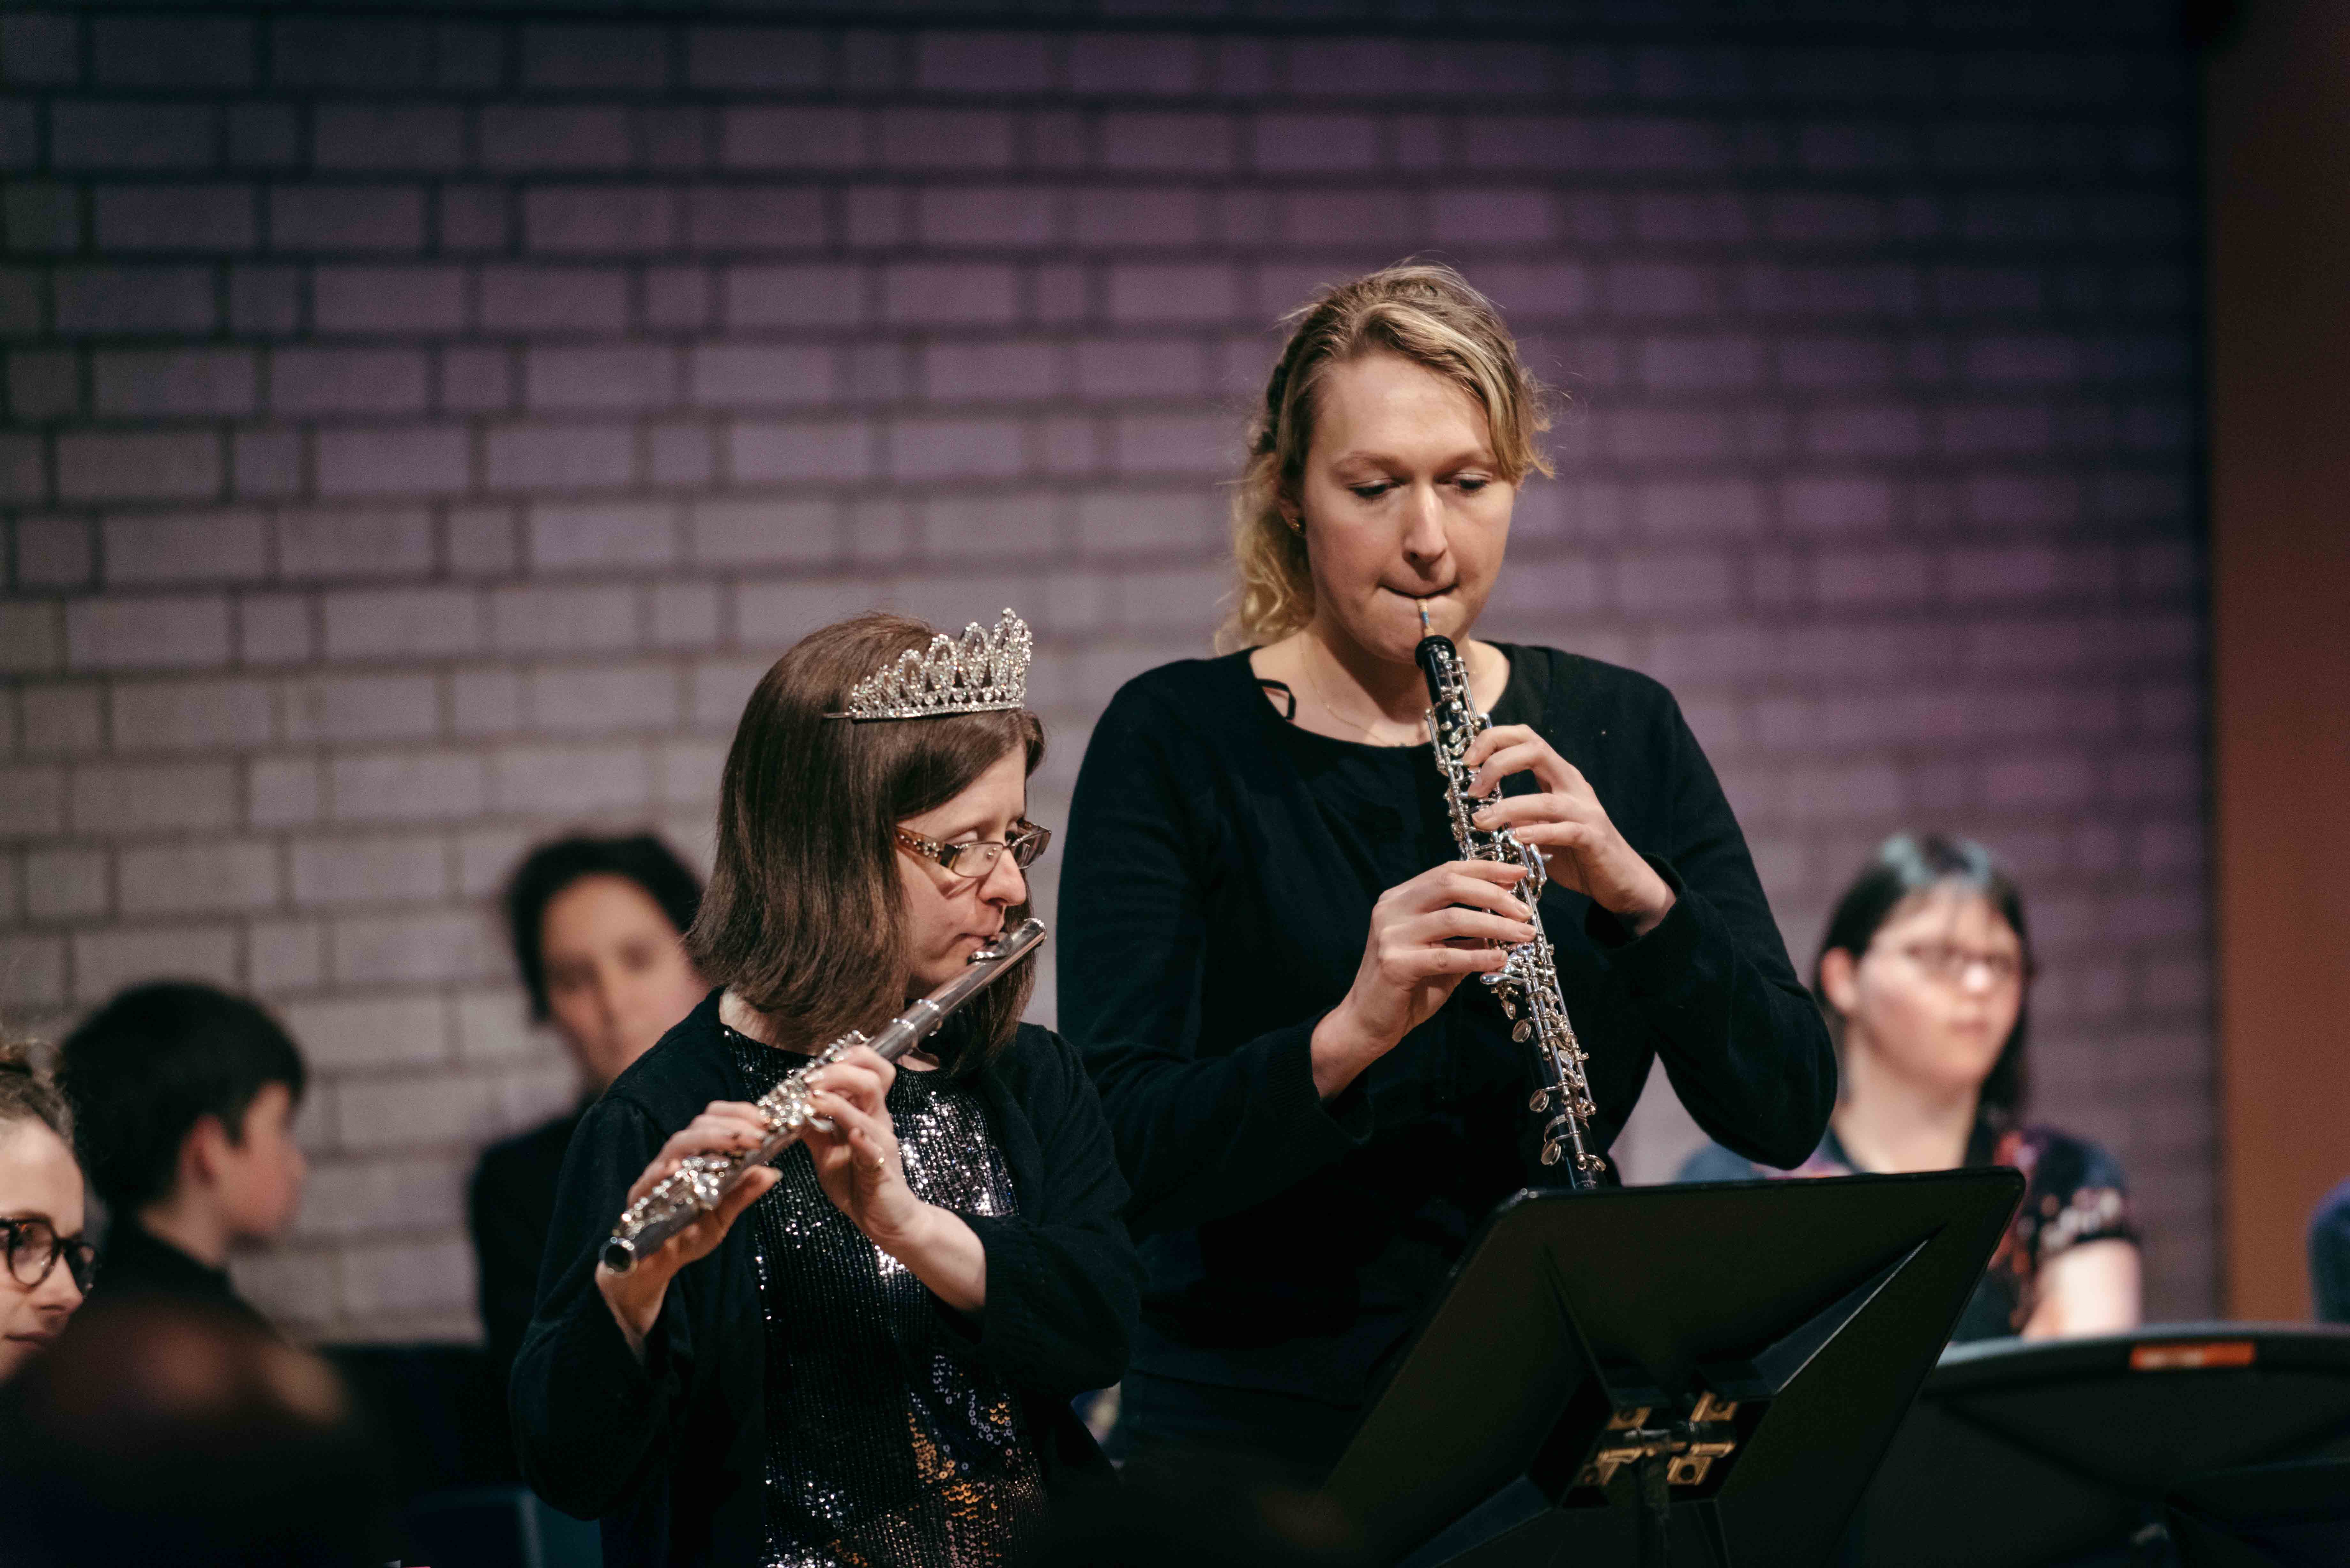 Two RNCM students play a flute and clarinet respectively. 